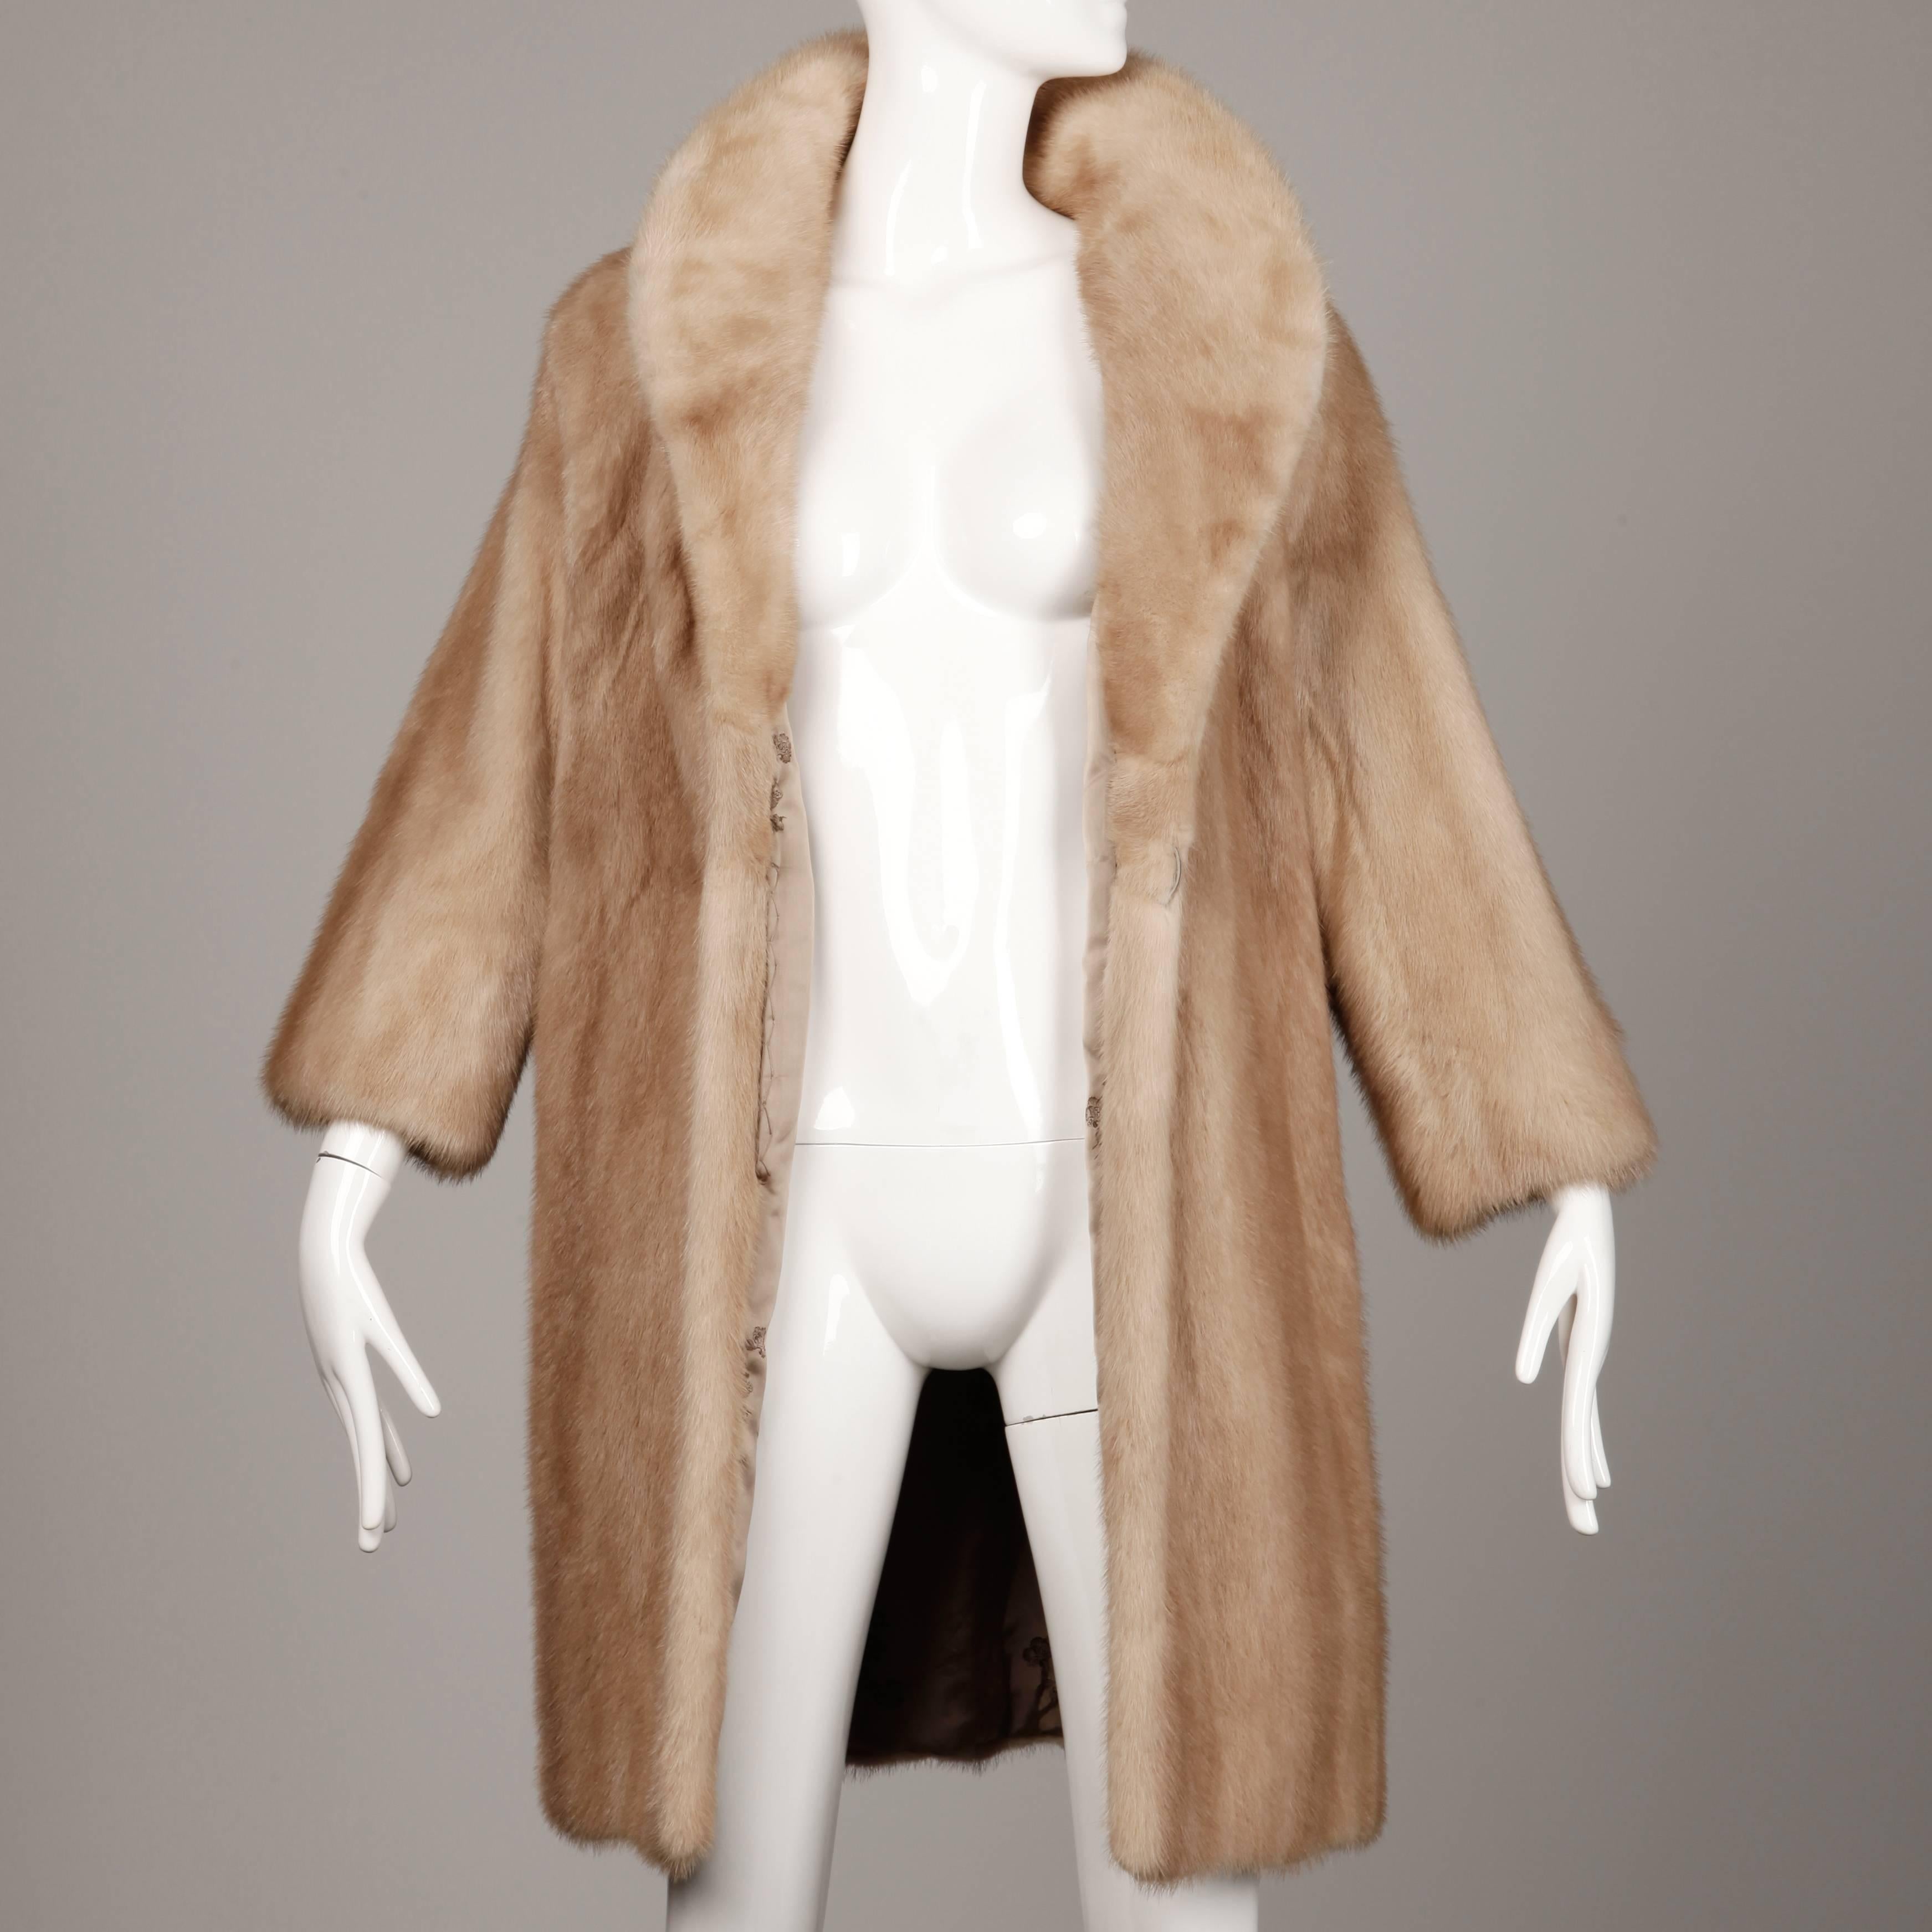 Simple and chic 1960s vintage autumn haze mink with a rounded pop up collar. Fully lined with hidden side pockets and button closure. Fits like a modern size medium. The bust measures 42